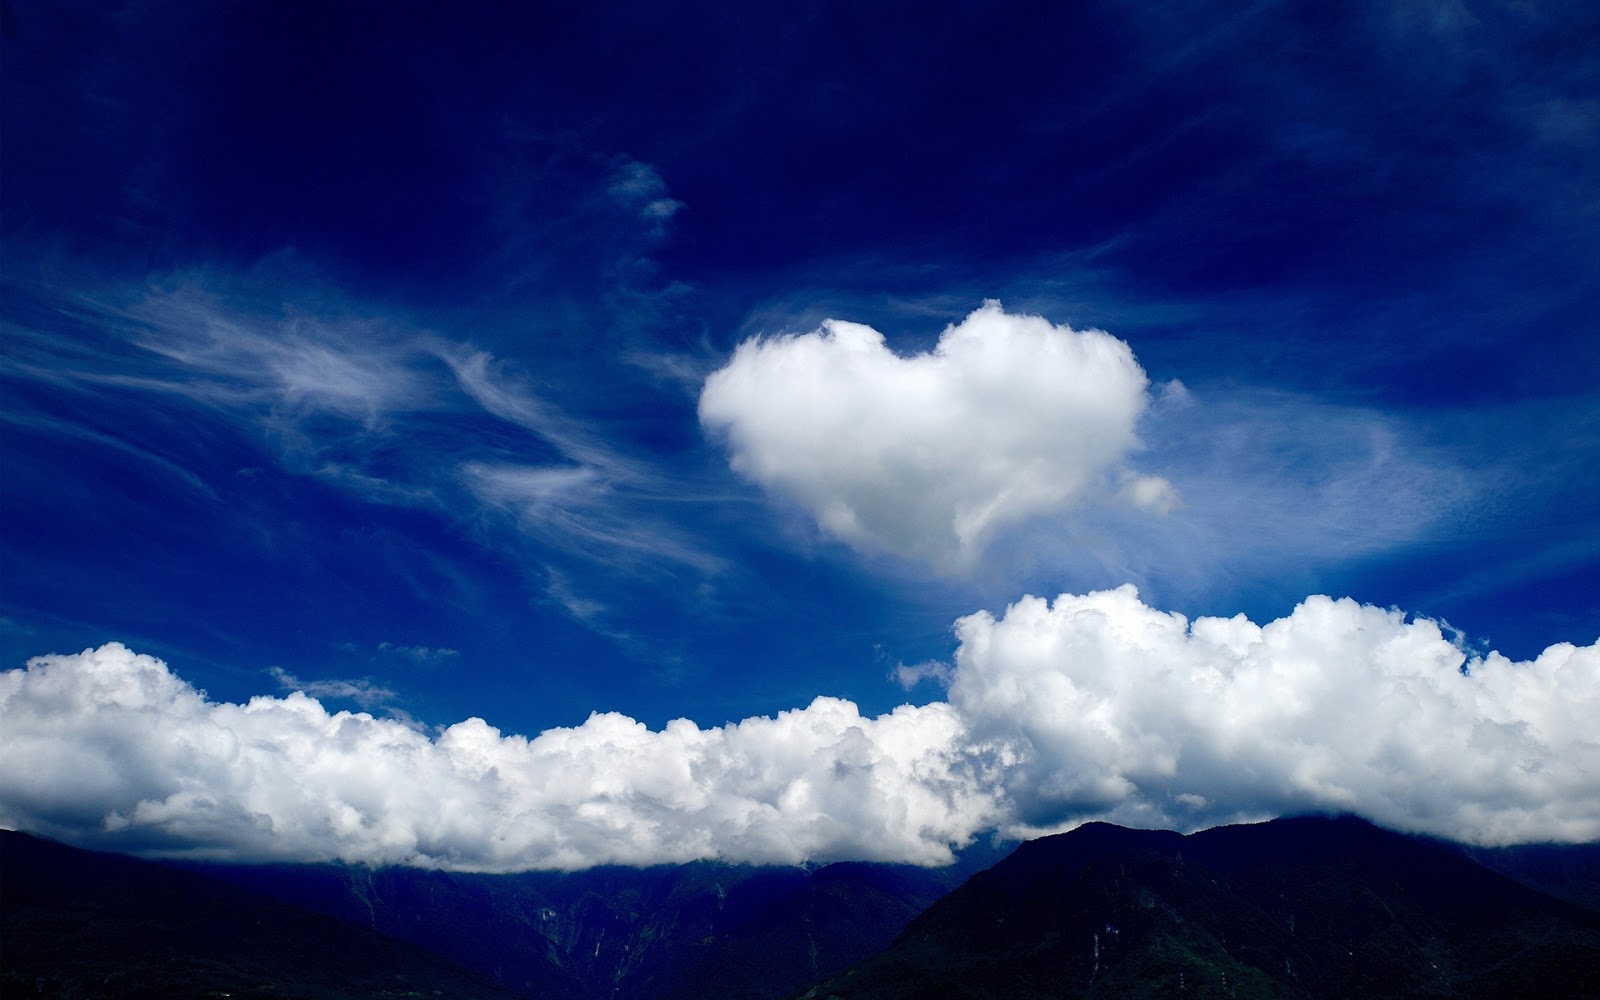 ART FOR YOUR WALLPAPER: Valentine's Day shaped cloud wallpaper